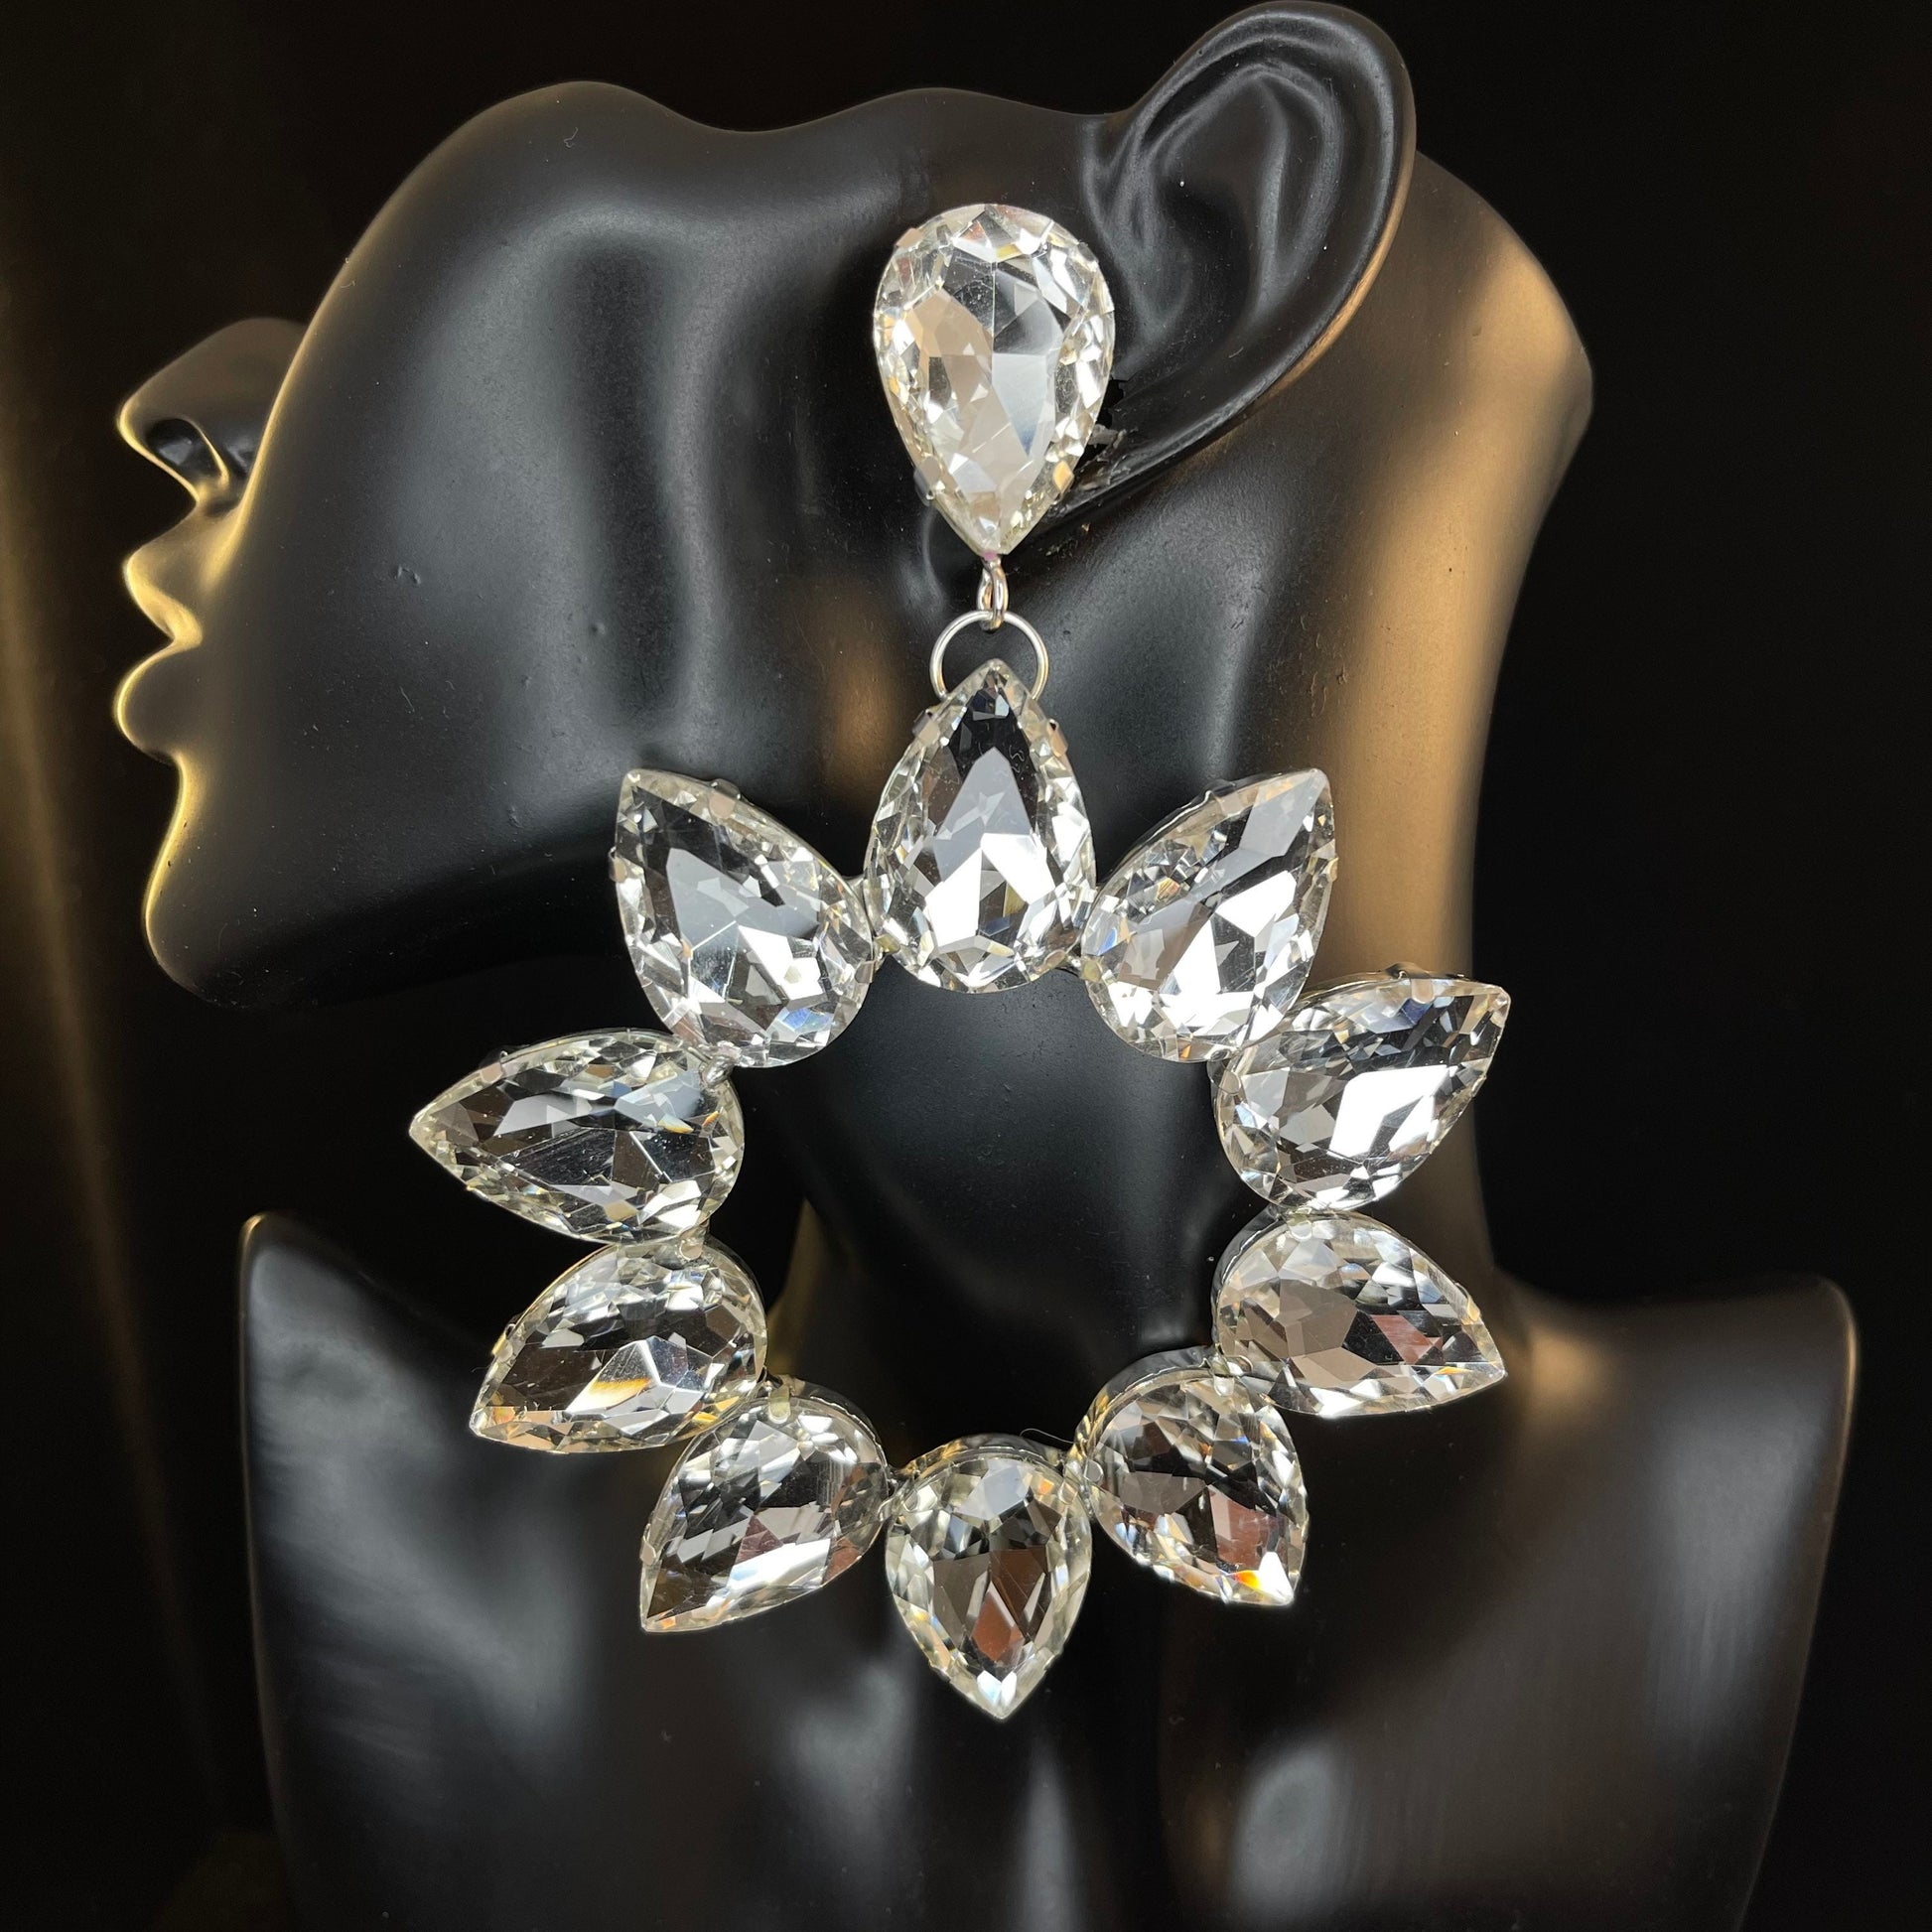 Crystal Earrings / Clip On or Pierced / Statement Earrings / Crystal Jewelry / Dress Earrings / Drag Queen / phantom of the opera